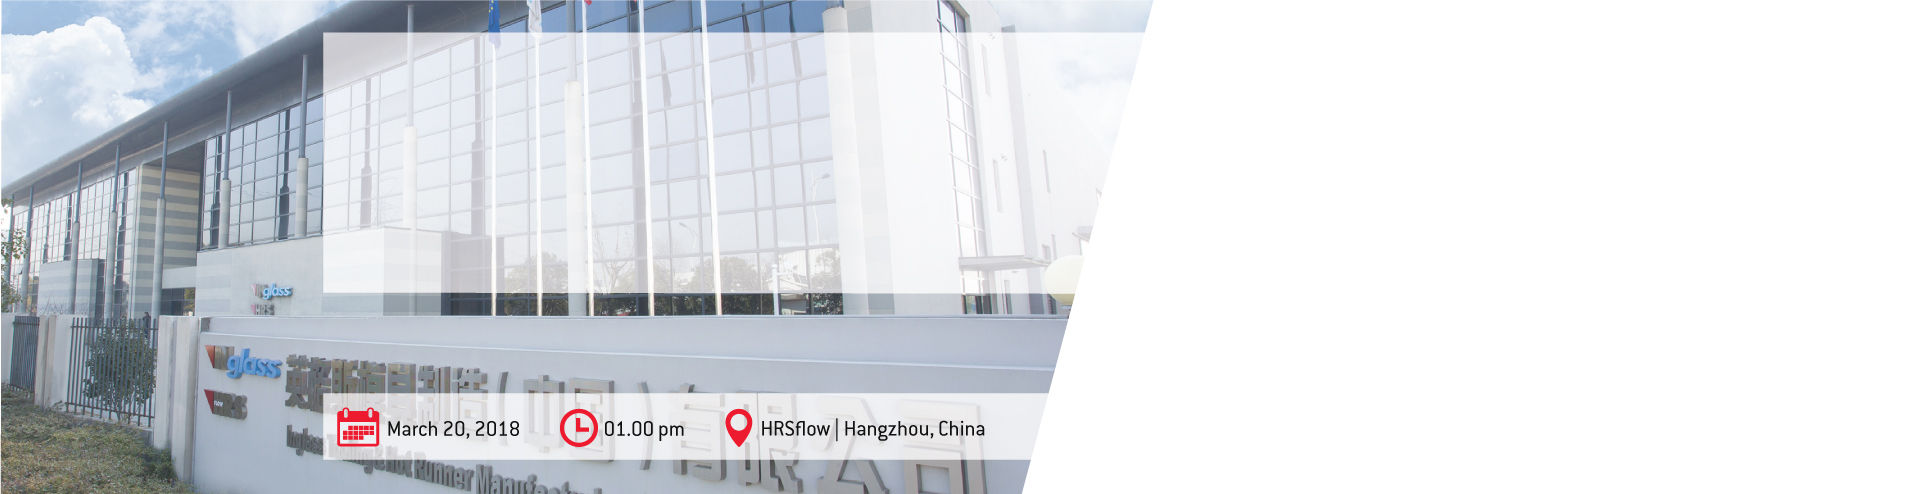 HRSflow-open-house-china